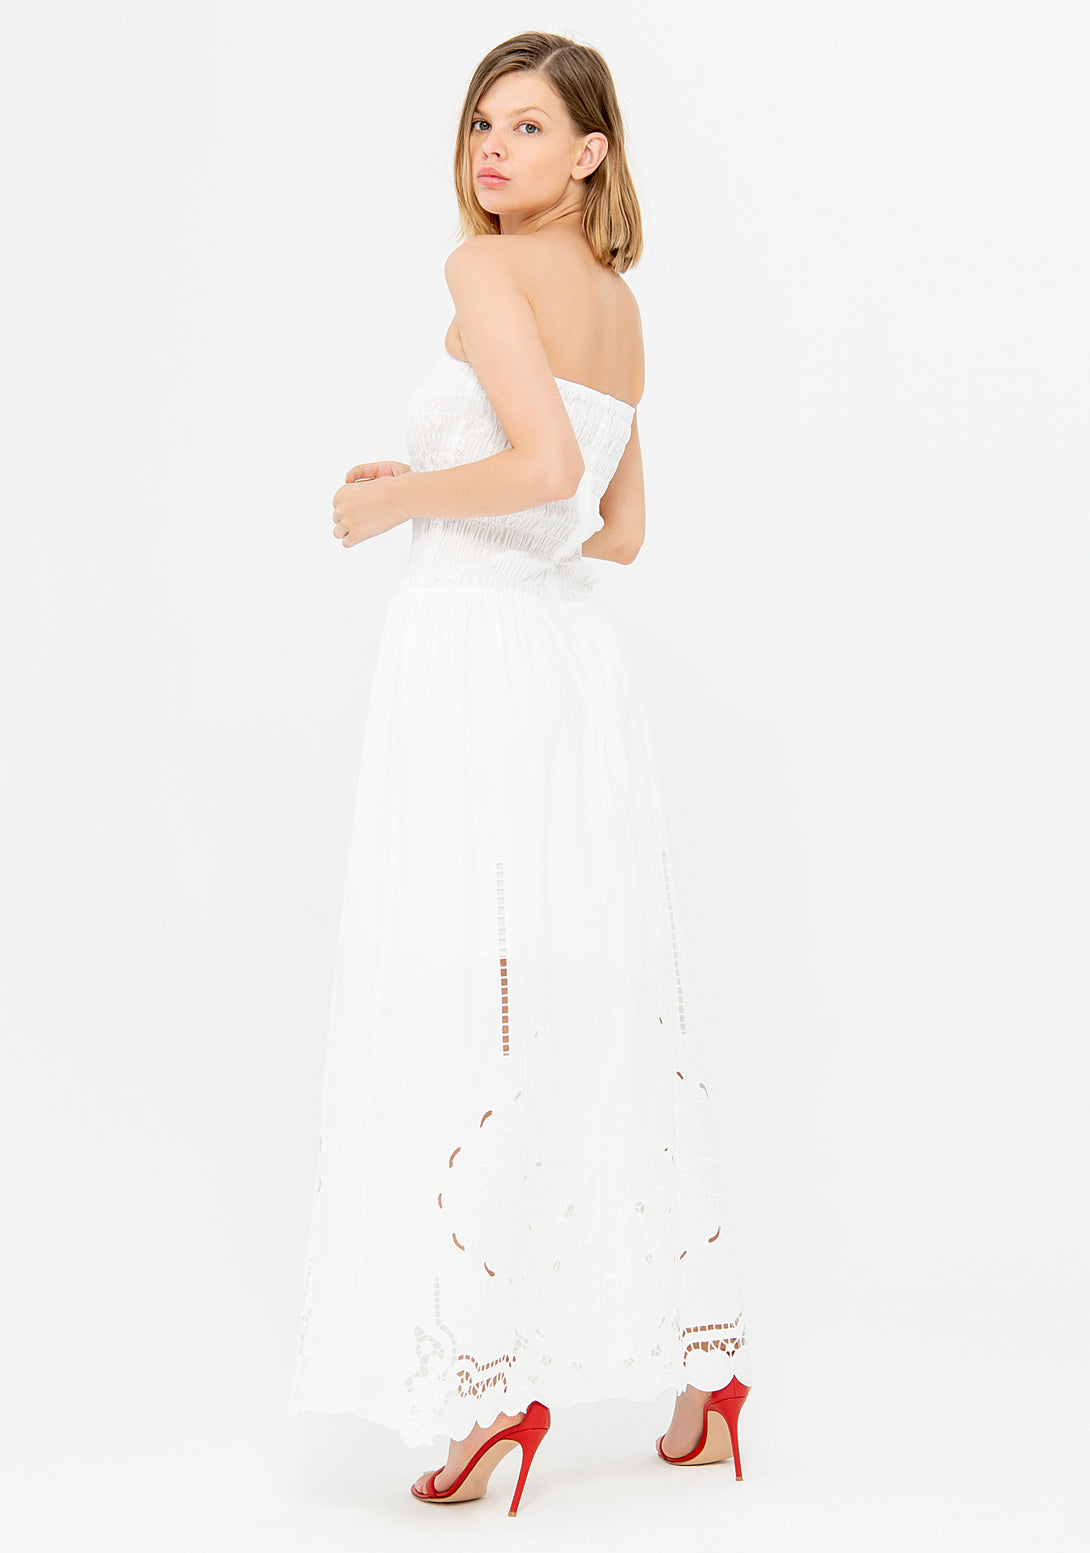 Long dress made in cotton with embroidery and no sleeves